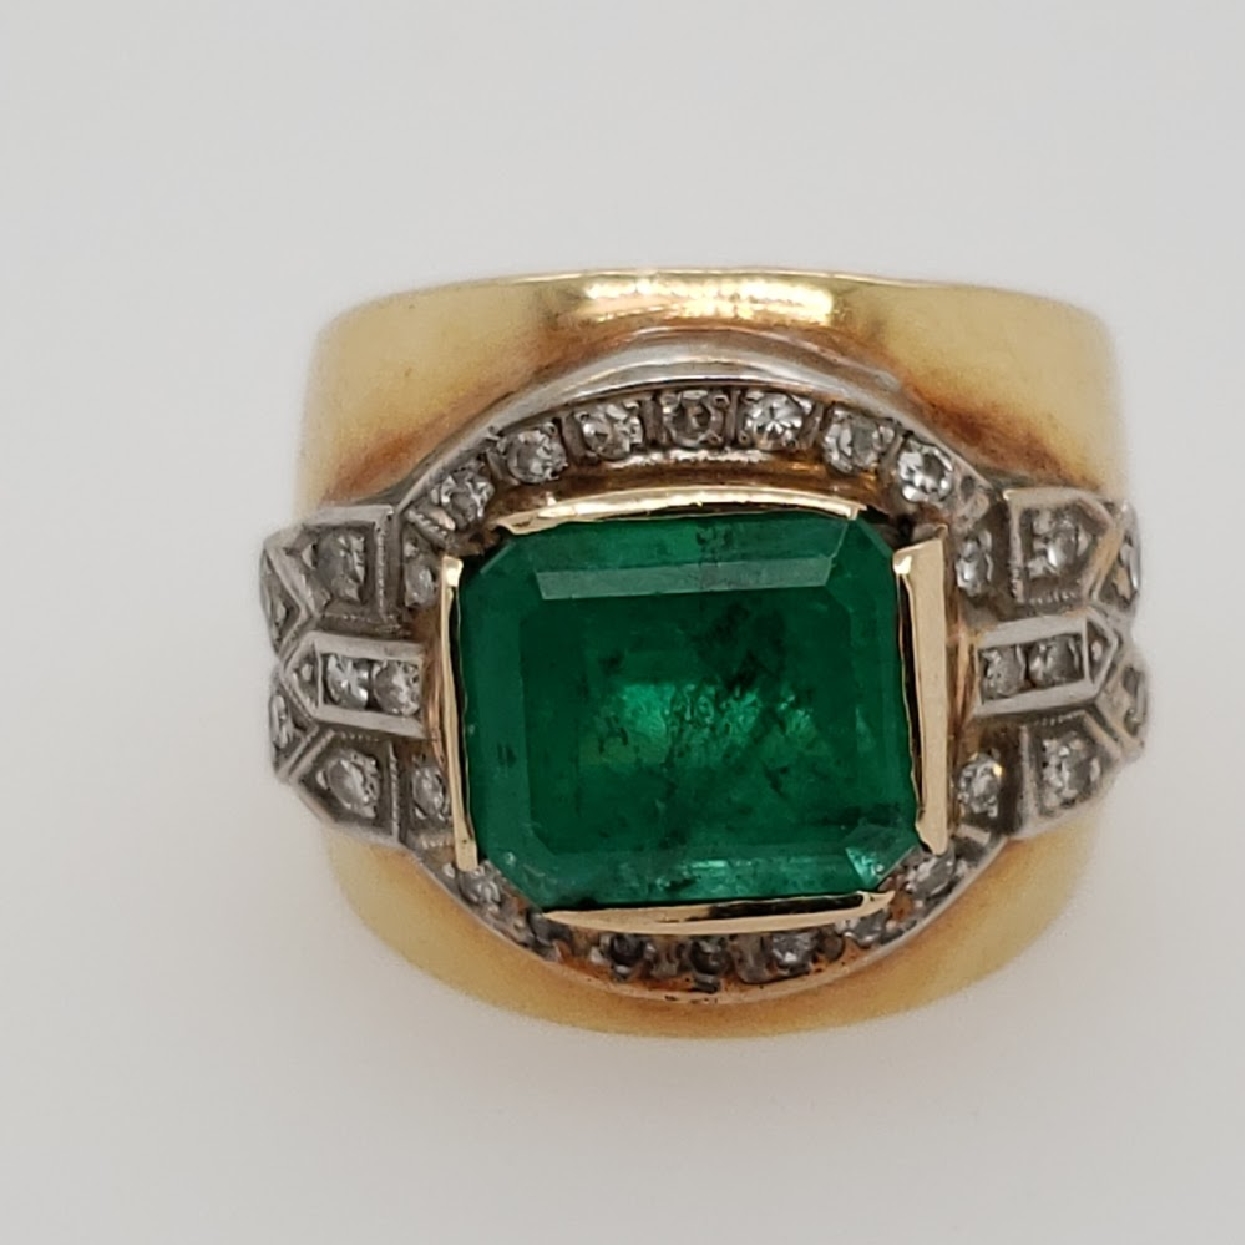 14K Two Tone Gold Emerald and Diamond Ring Size 6.75
Emerald is Emerald Cut and Bezel Set; wieghing approximately 6.02CT
It is surrounded by 27 Round Single Cut Diamonds; weighing approximately 0.80CTTW